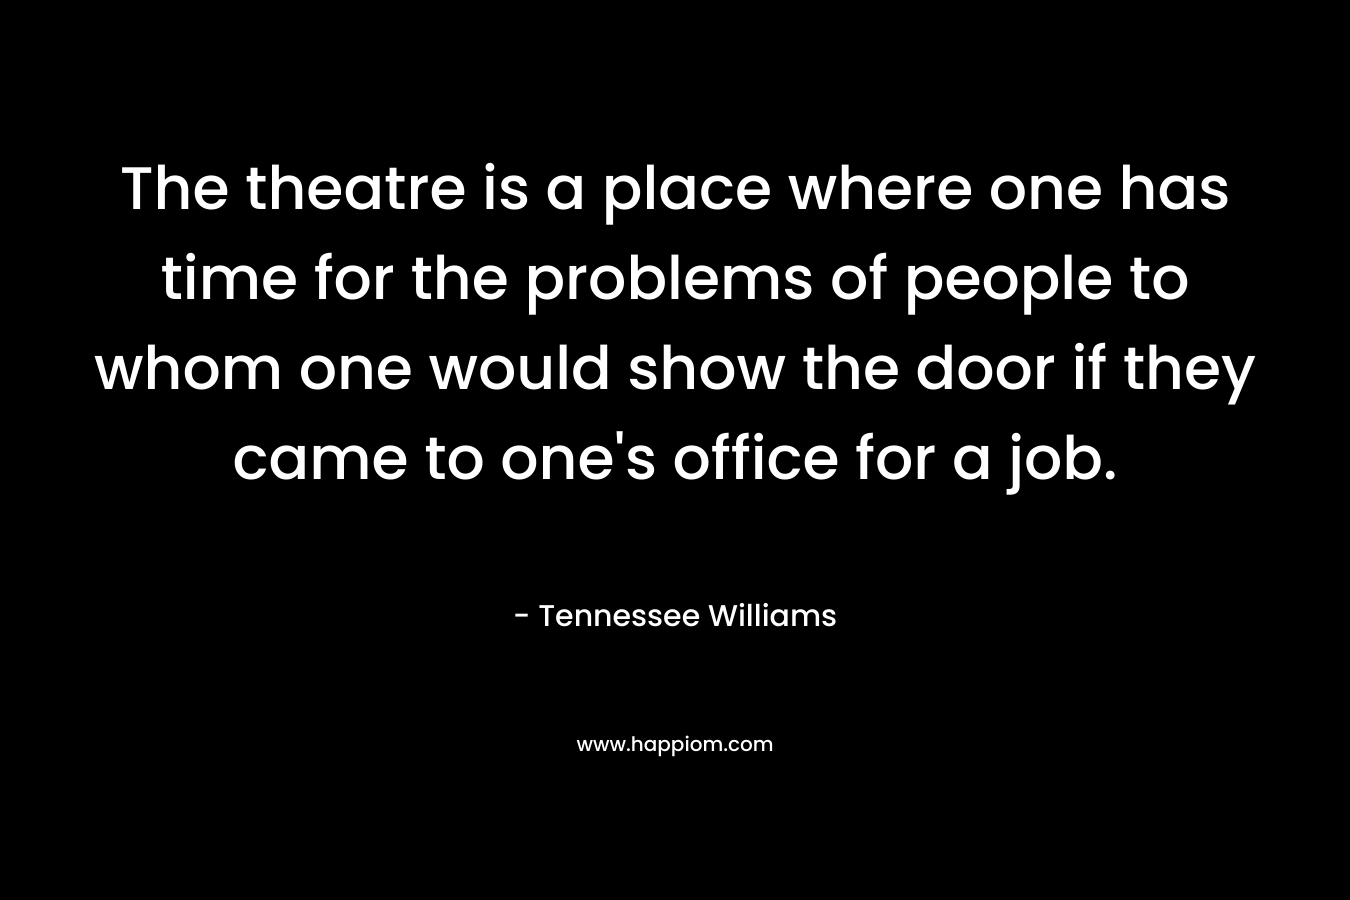 The theatre is a place where one has time for the problems of people to whom one would show the door if they came to one’s office for a job. – Tennessee Williams